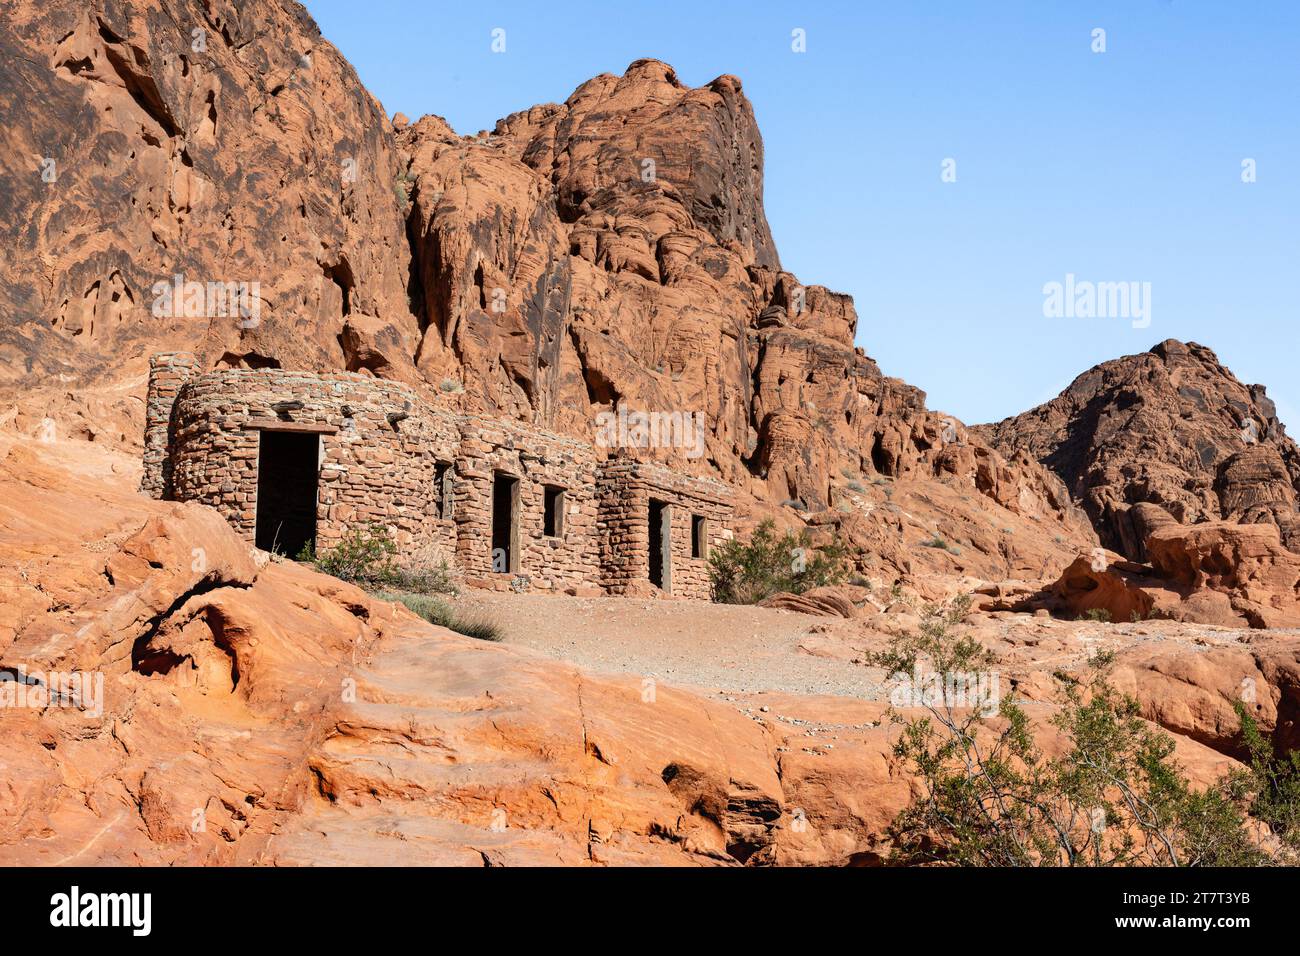 The Cabins, built by the Civilian Conservation Corps (CCC), in Valley of Fire State Park, near Las Vegas, Nevada. Stock Photo